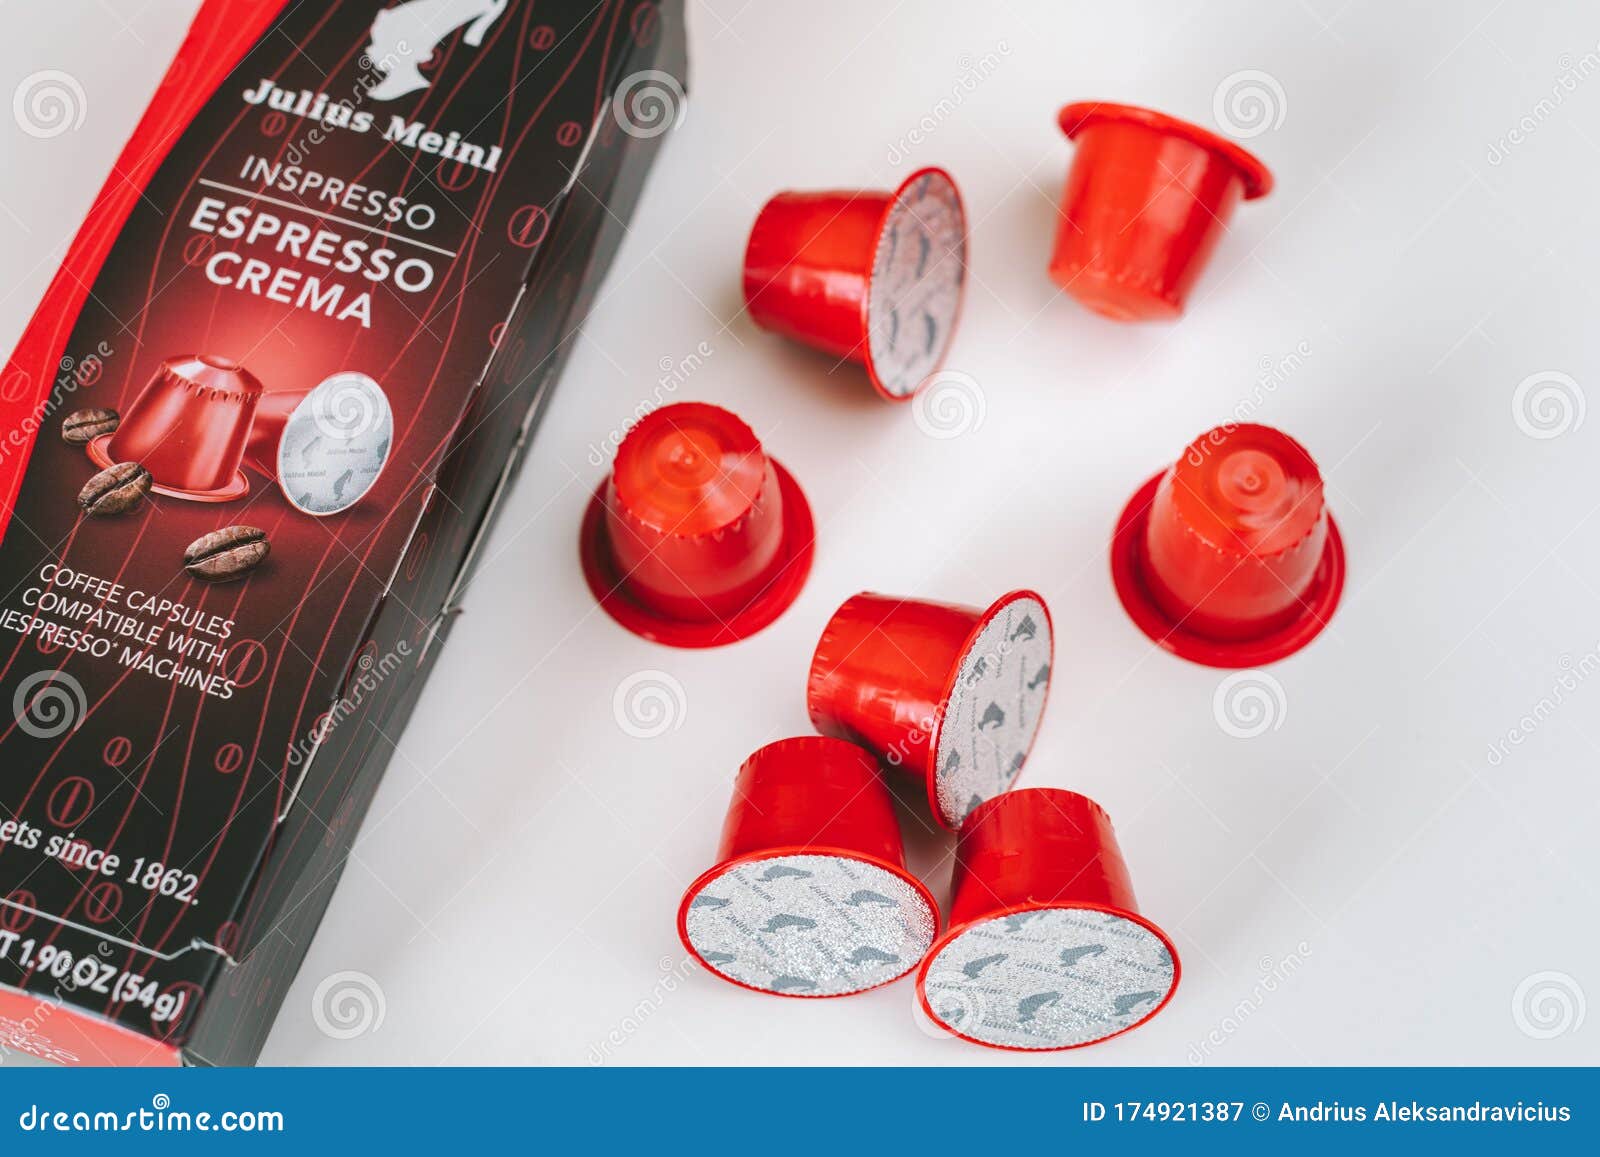 Dense masterpiece Closely Julius Meinl Coffee Capsules Editorial Photography - Image of flavor, cafe:  174921387